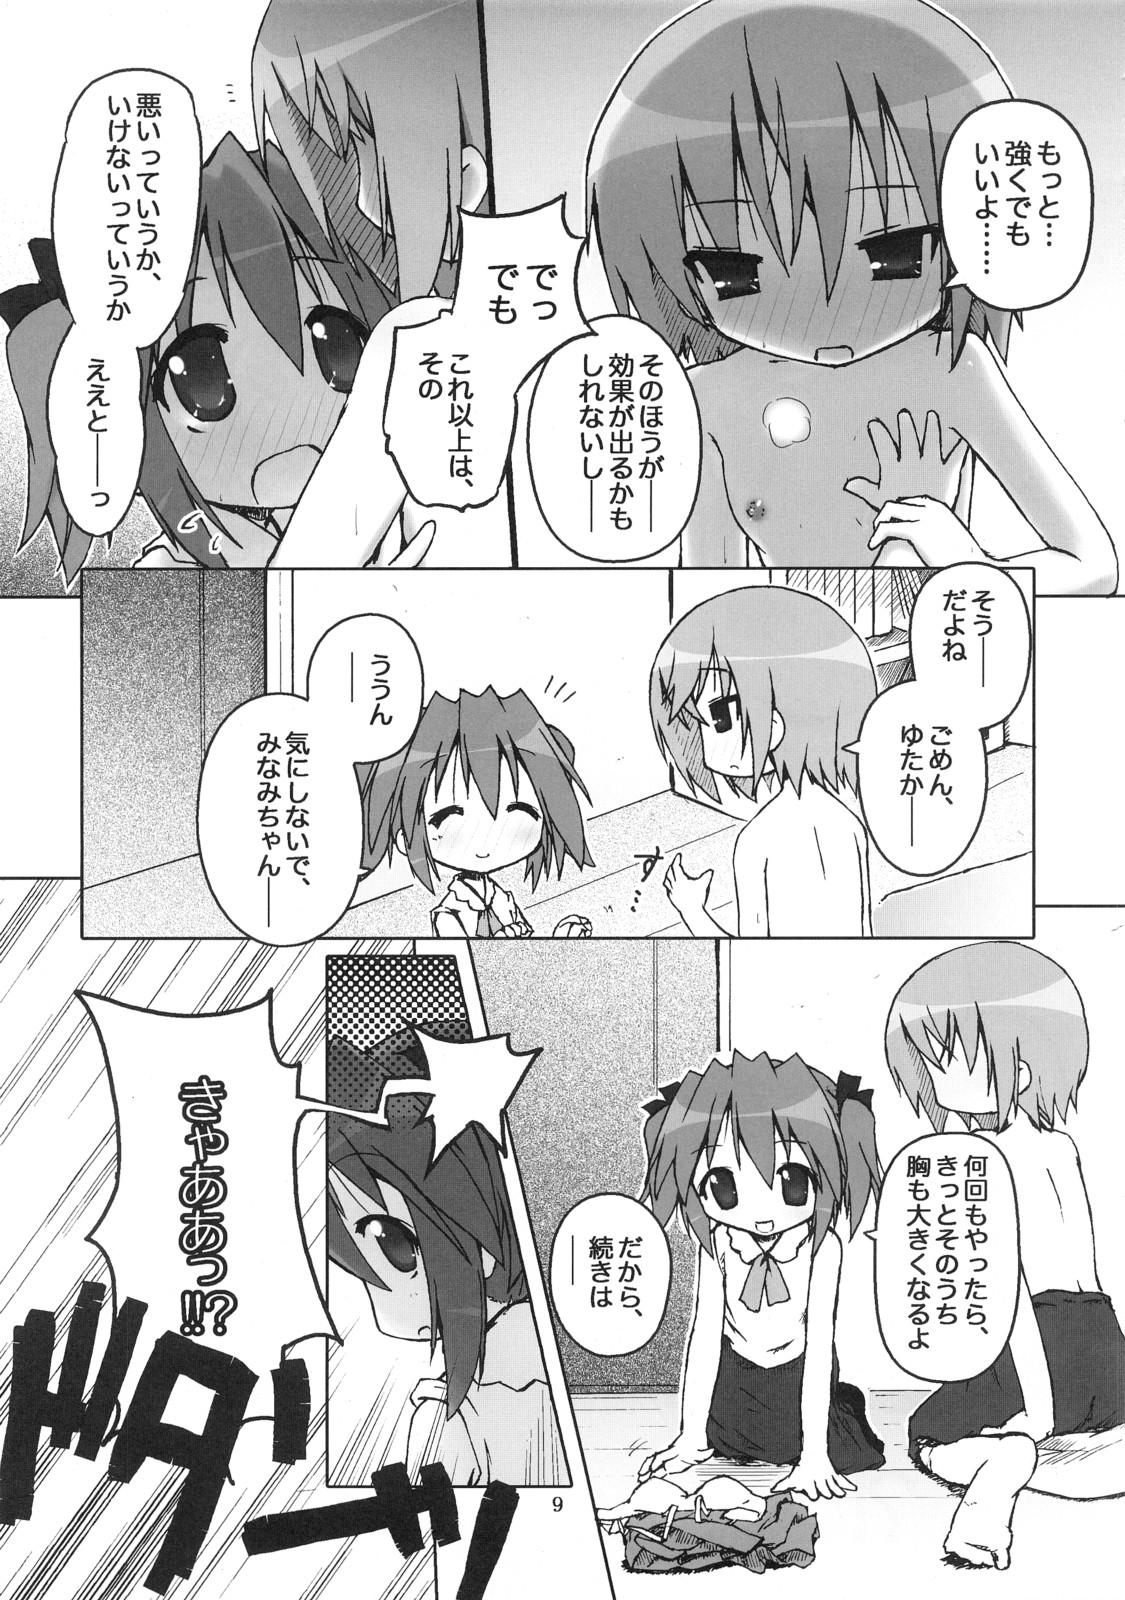 Strapon Hiyorin Break!! - Lucky star Clothed - Page 10